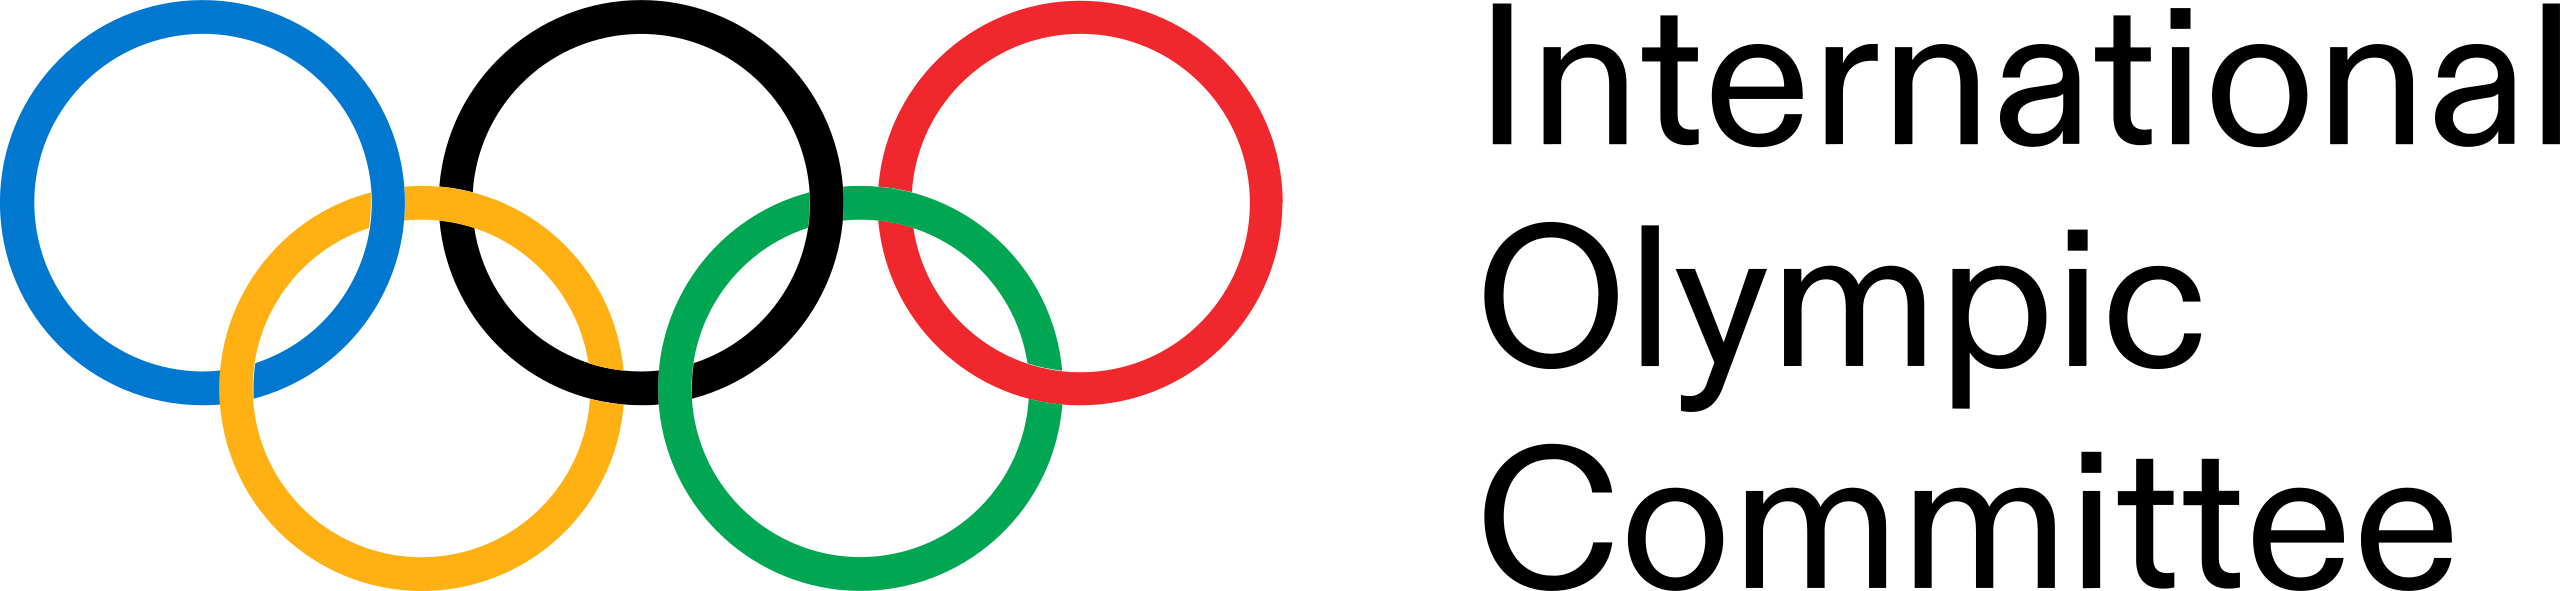 File International Olympic Committee Logo 2021 Svg Wikimedia Commons